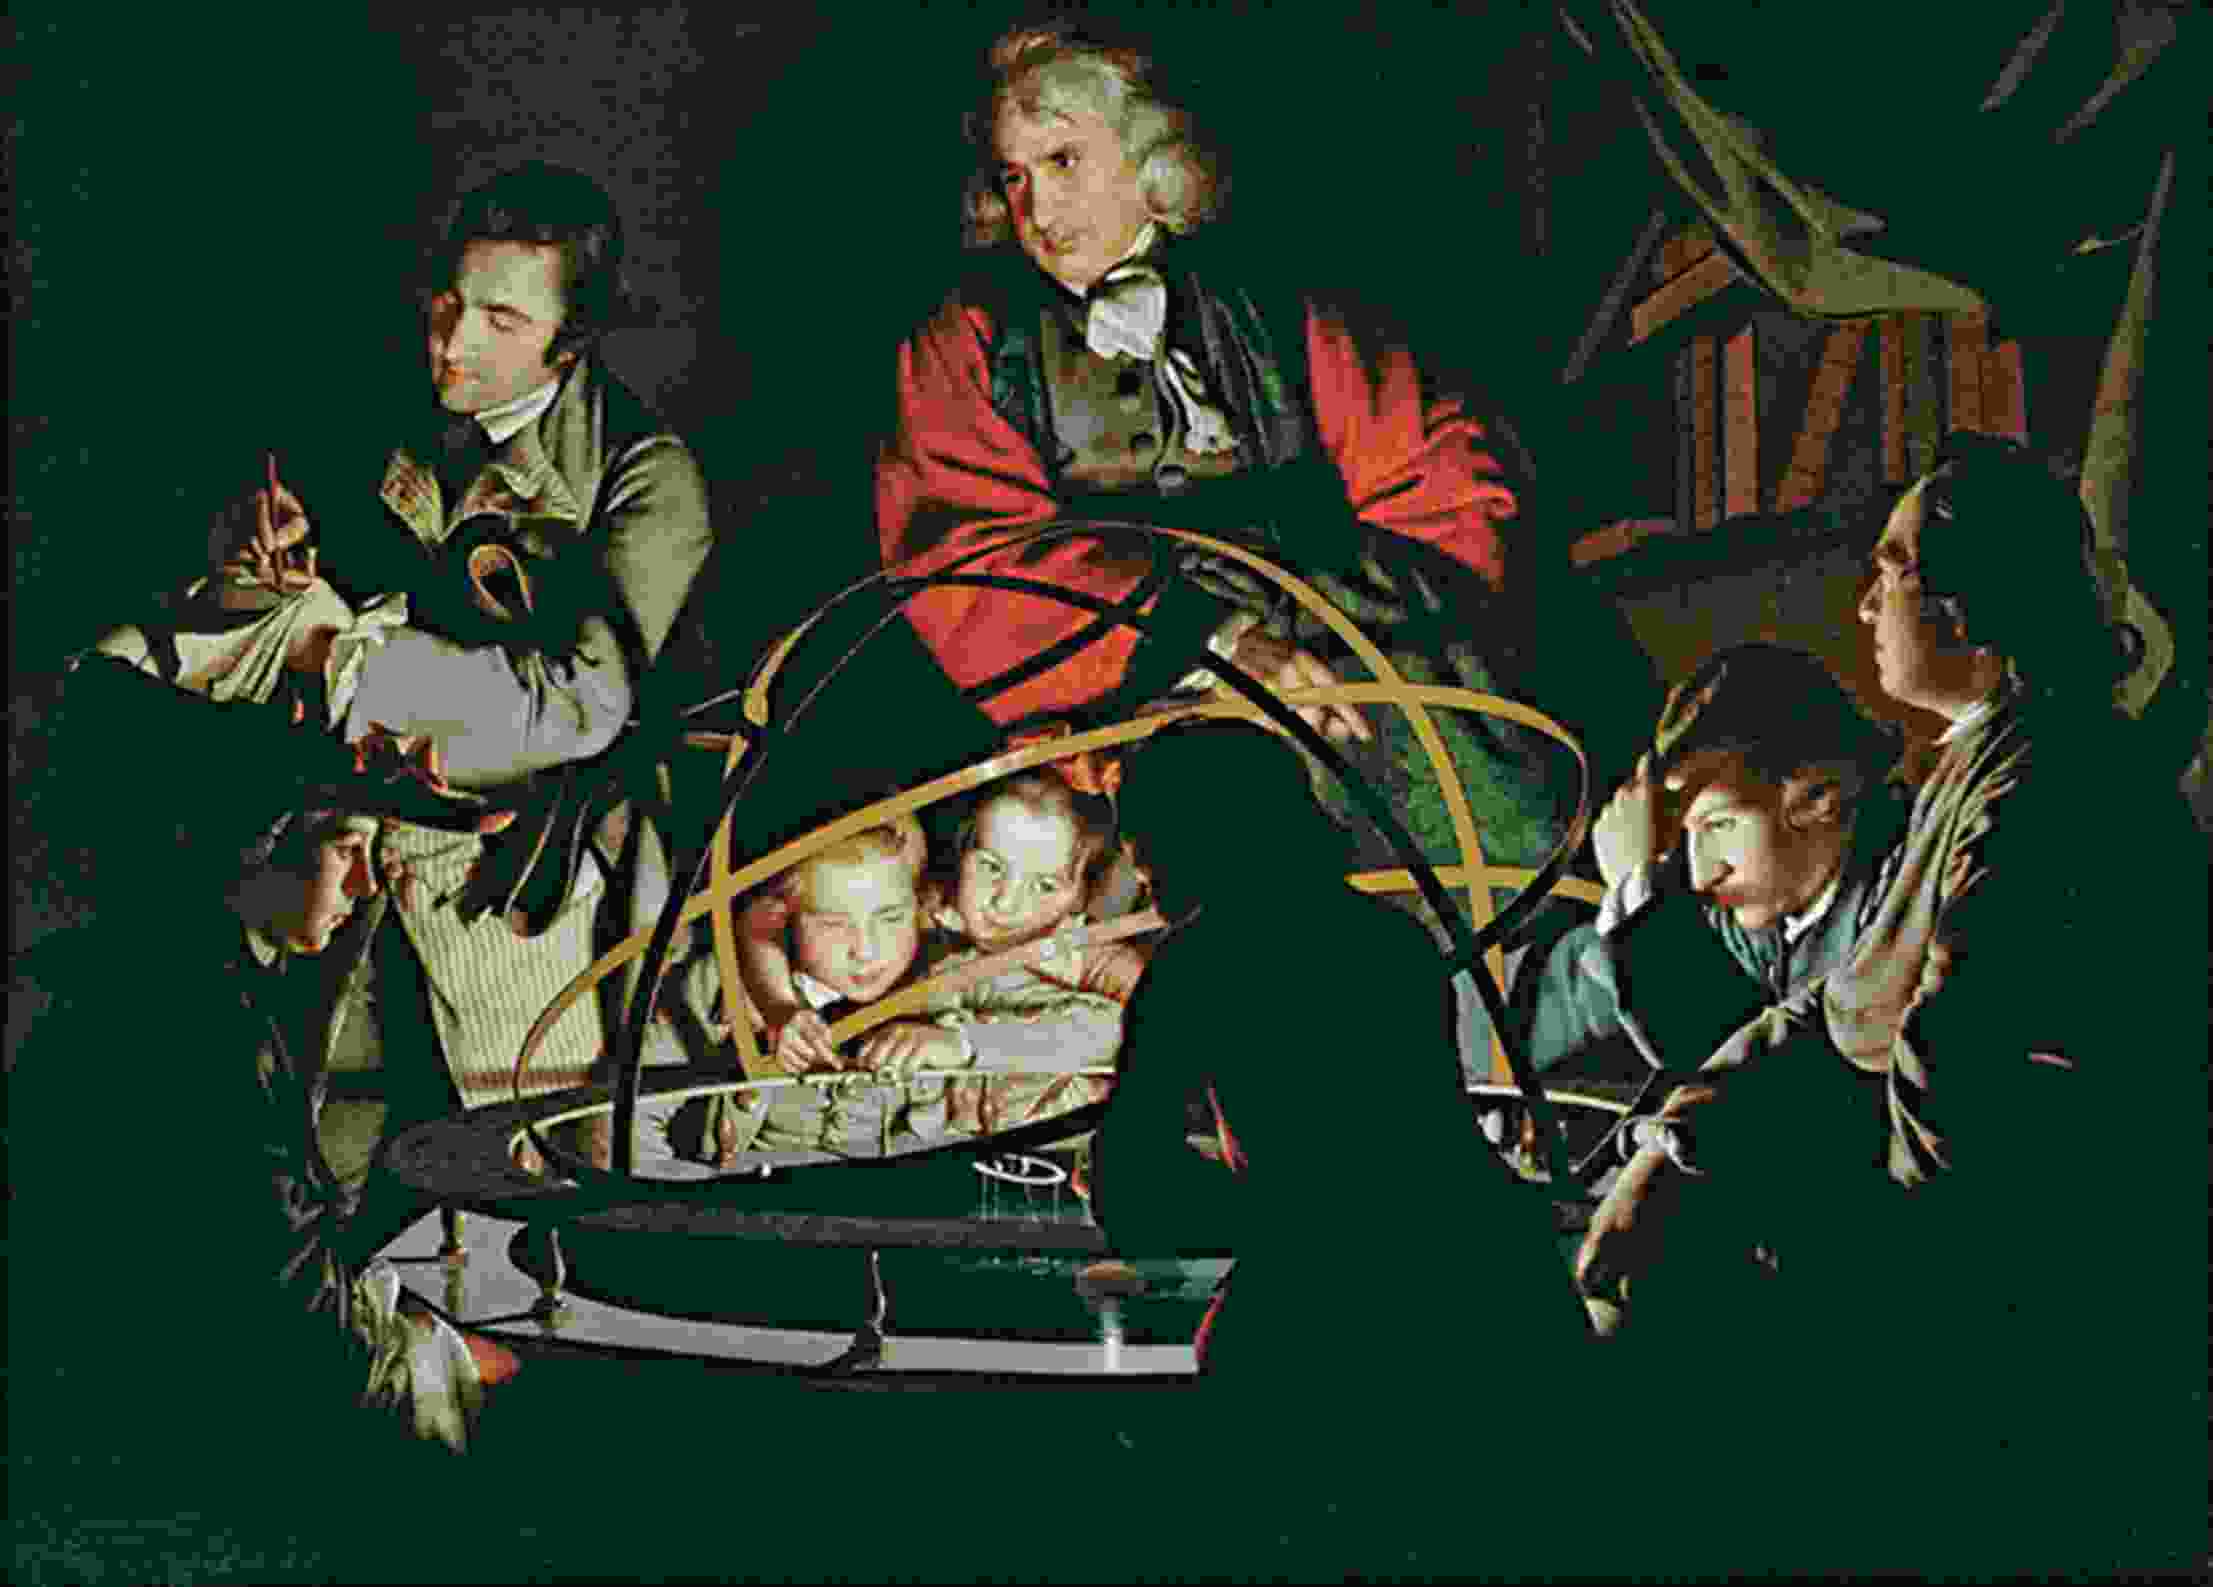 Joseph Wright of Derby’s A Philosopher Gives a Lecture on the Orrery of 1766